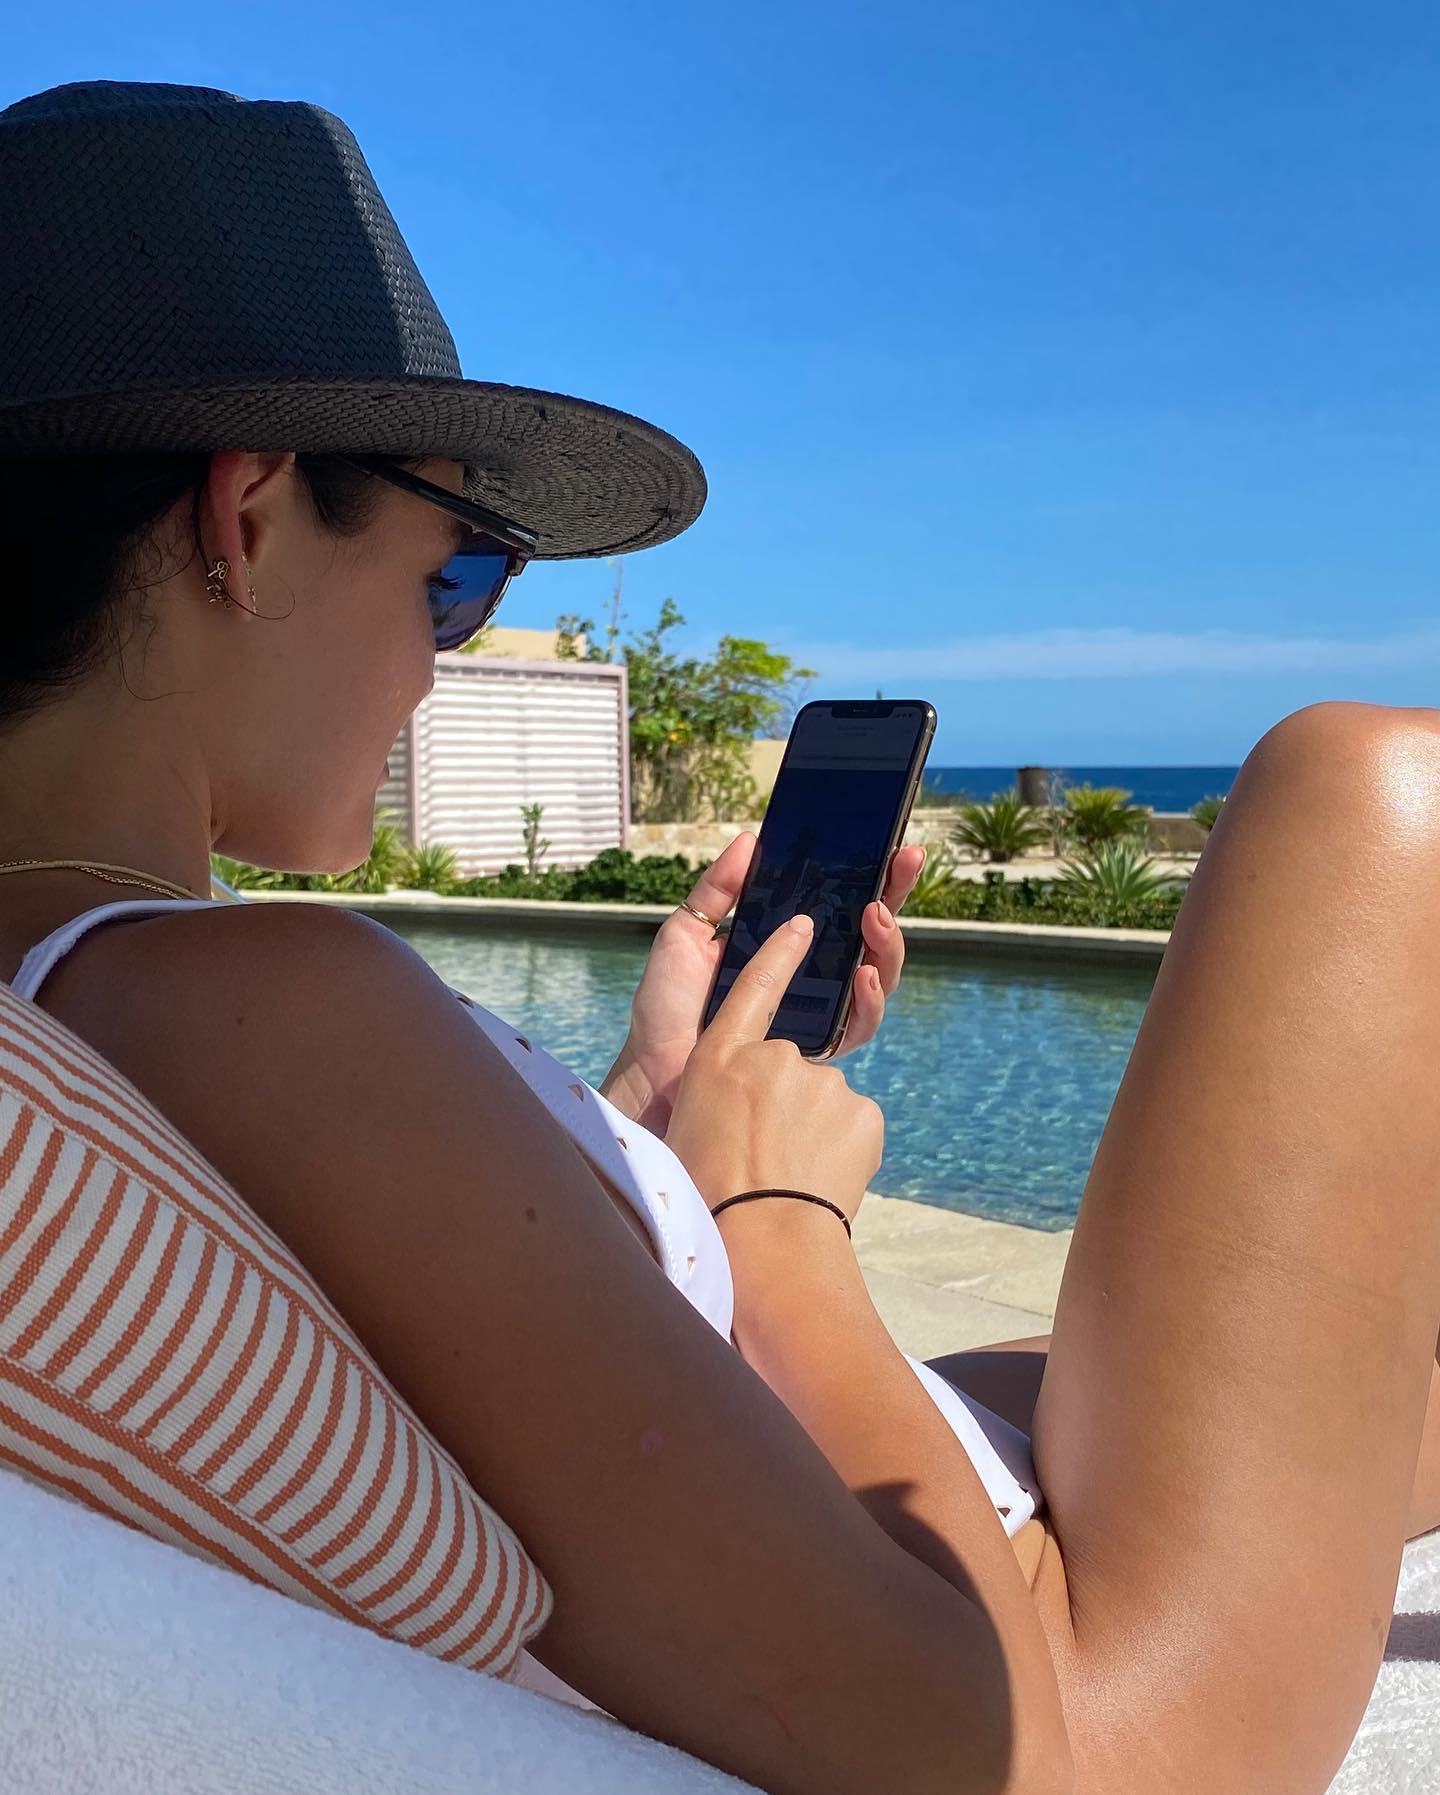 Photos n°4 : Lucy Hale on Vacation!